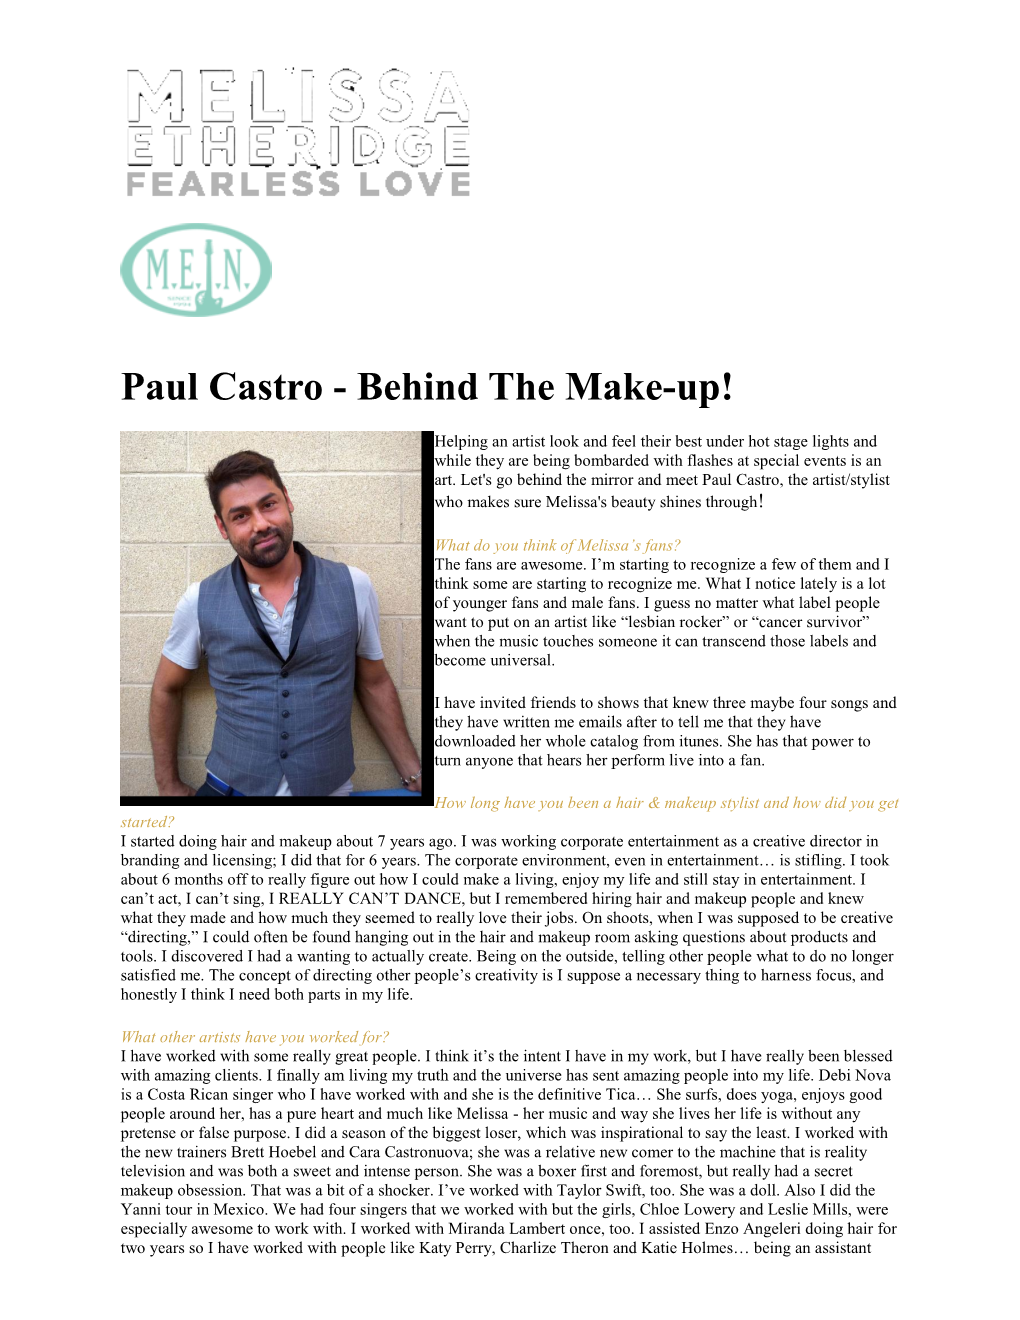 Paul Castro - Behind the Make-Up!